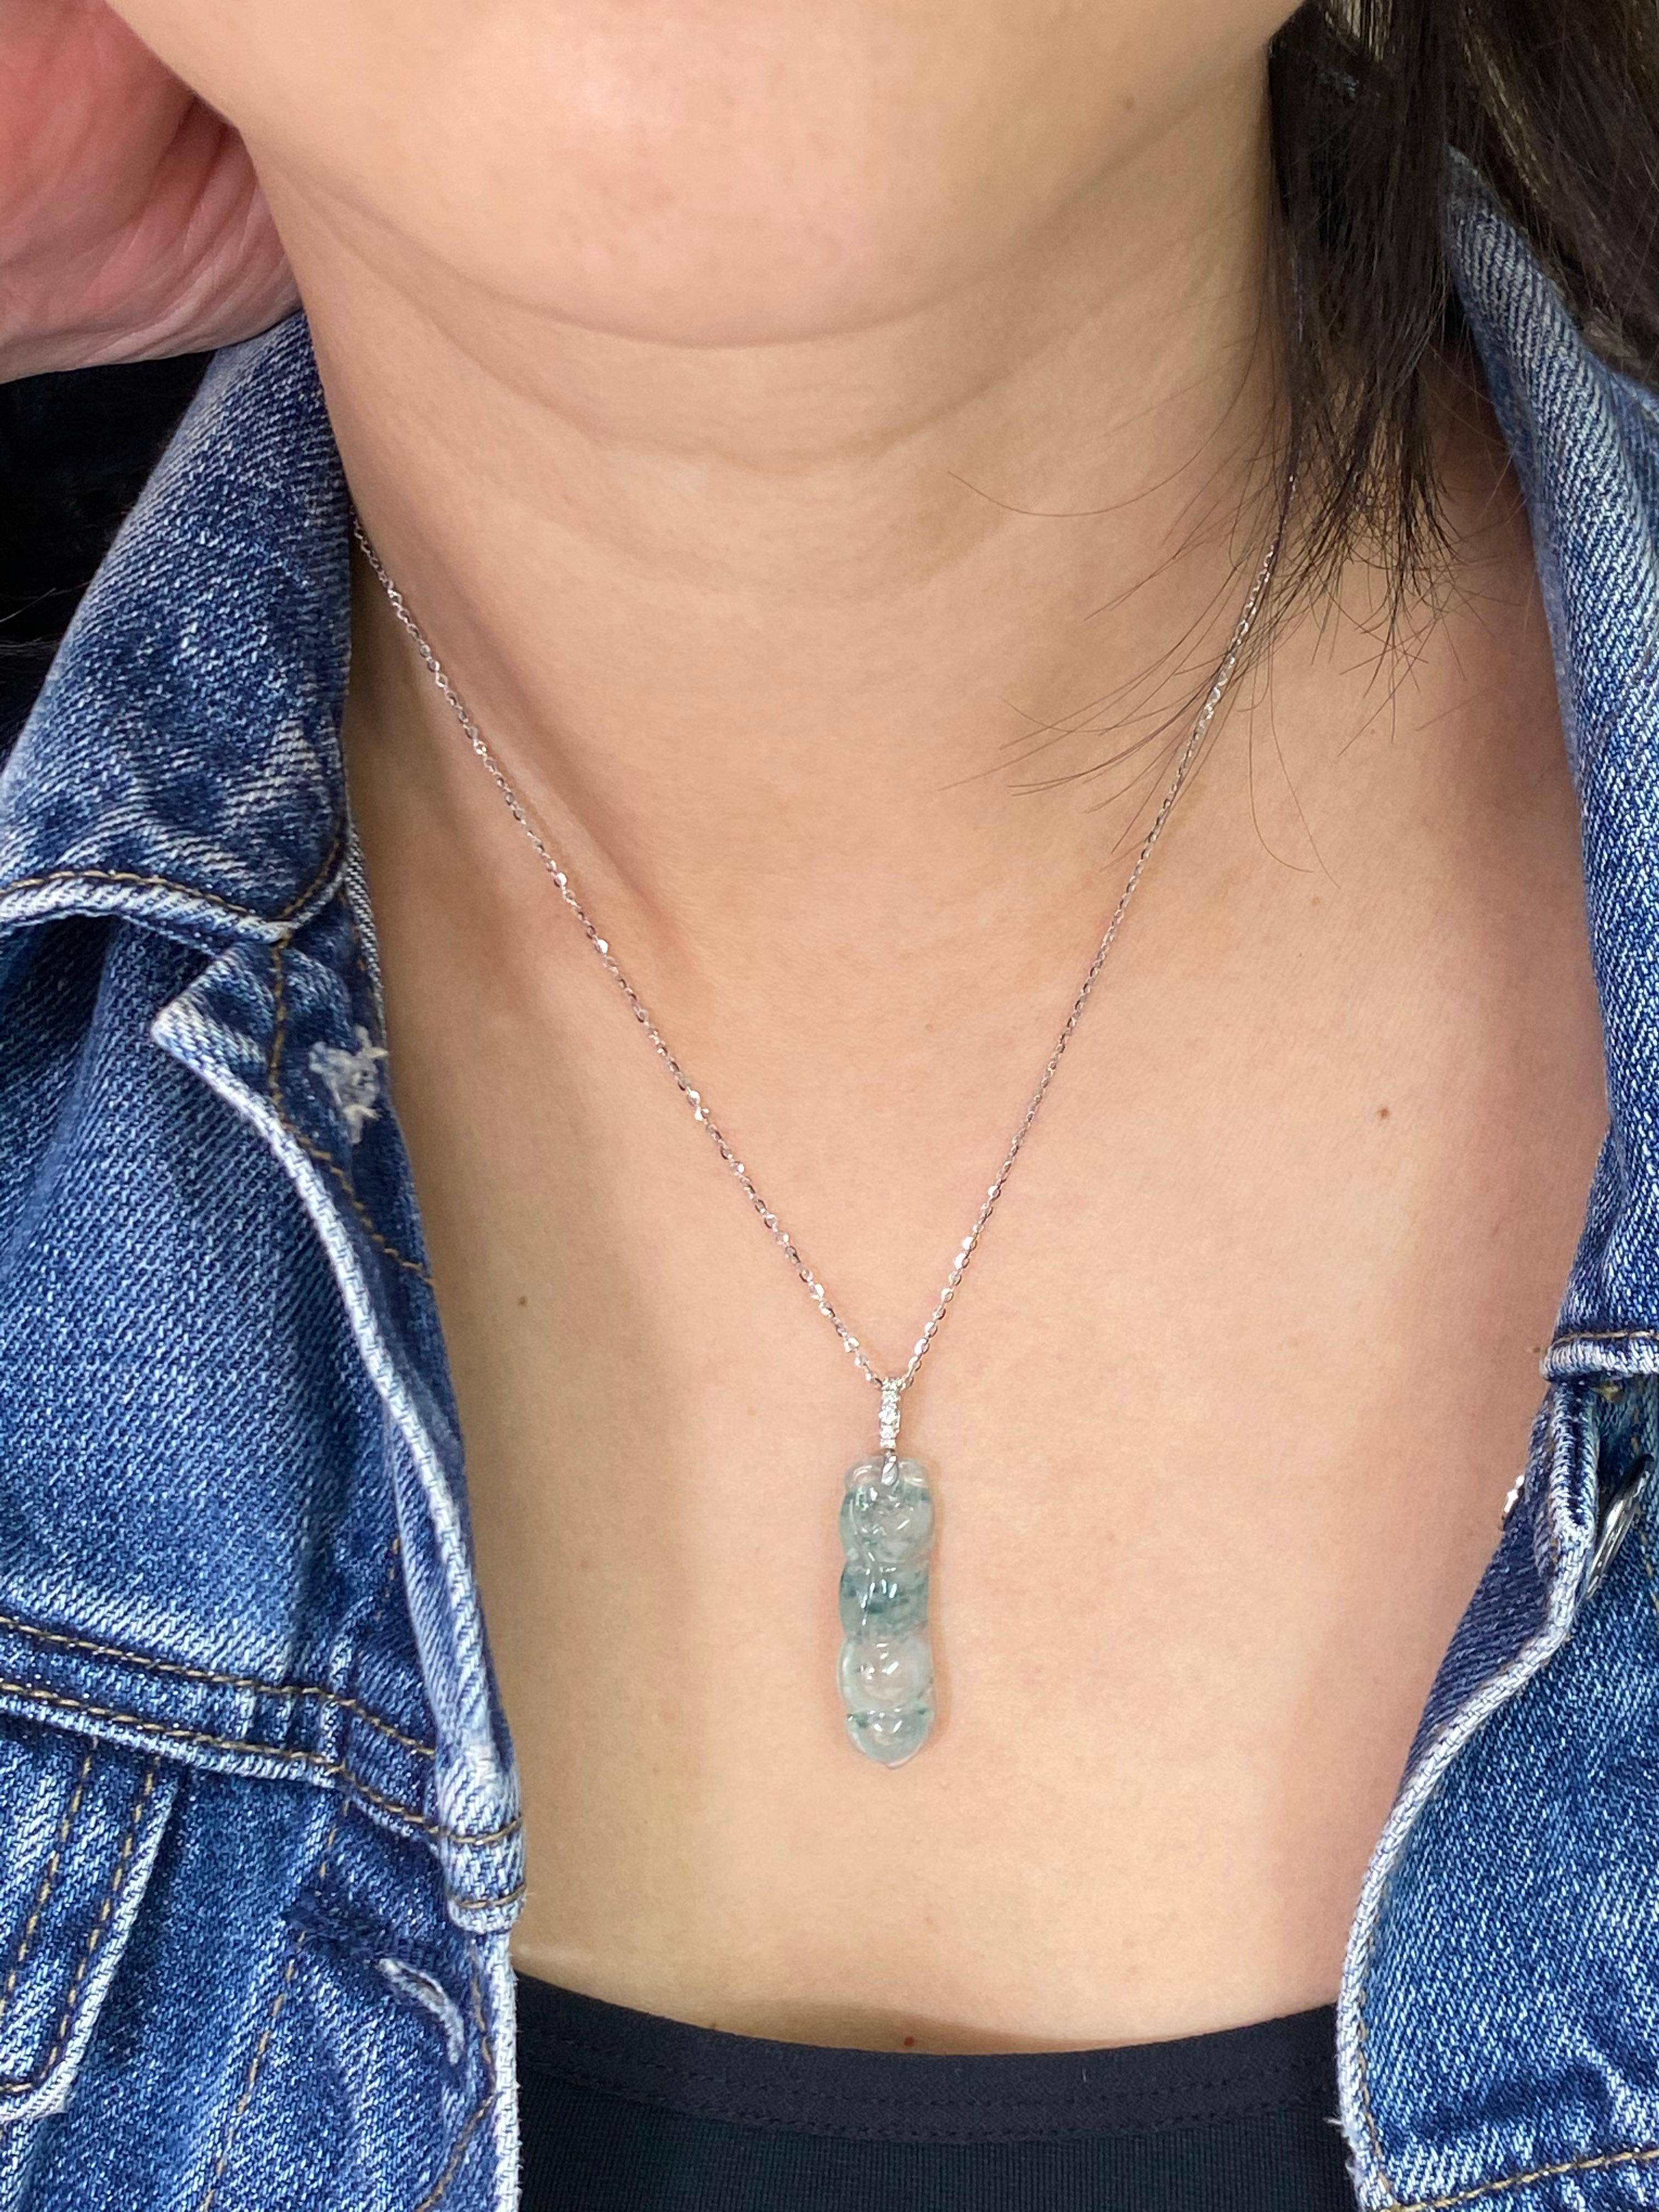 This icy jade pendant are certified by 2 labs. Here is a nice icy Jadeite Jade peapod with green veins running through it . The pendant is about 4 cm long and 1 cm wide. The pendant is set in 18k white gold, and white diamonds. The icy jade peapod